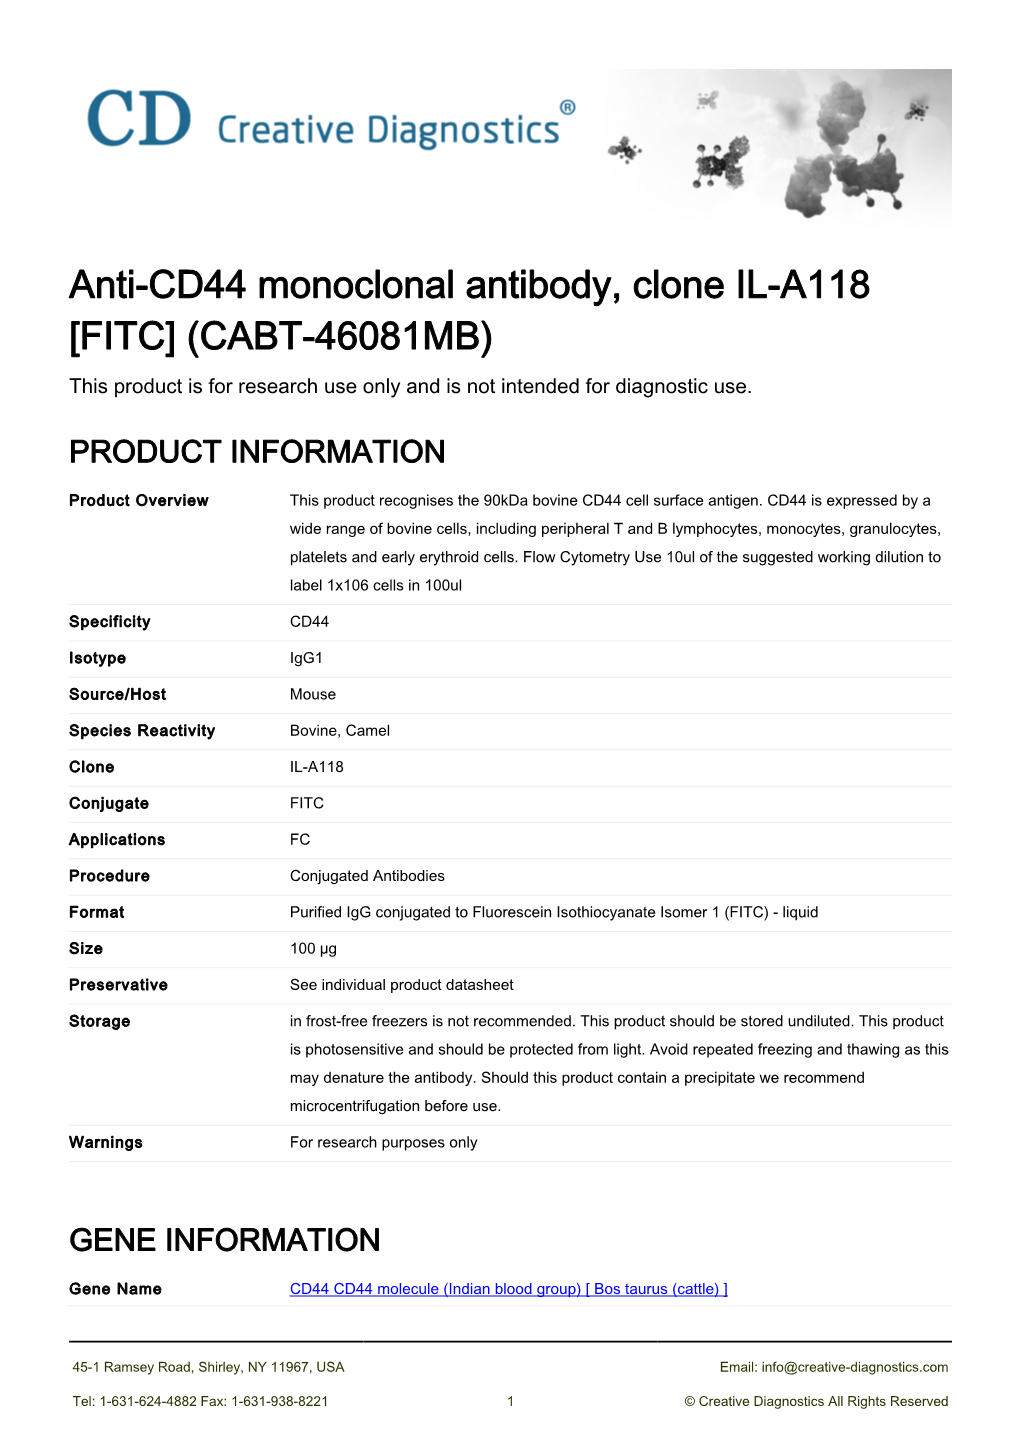 Anti-CD44 Monoclonal Antibody, Clone IL-A118 [FITC] (CABT-46081MB) This Product Is for Research Use Only and Is Not Intended for Diagnostic Use